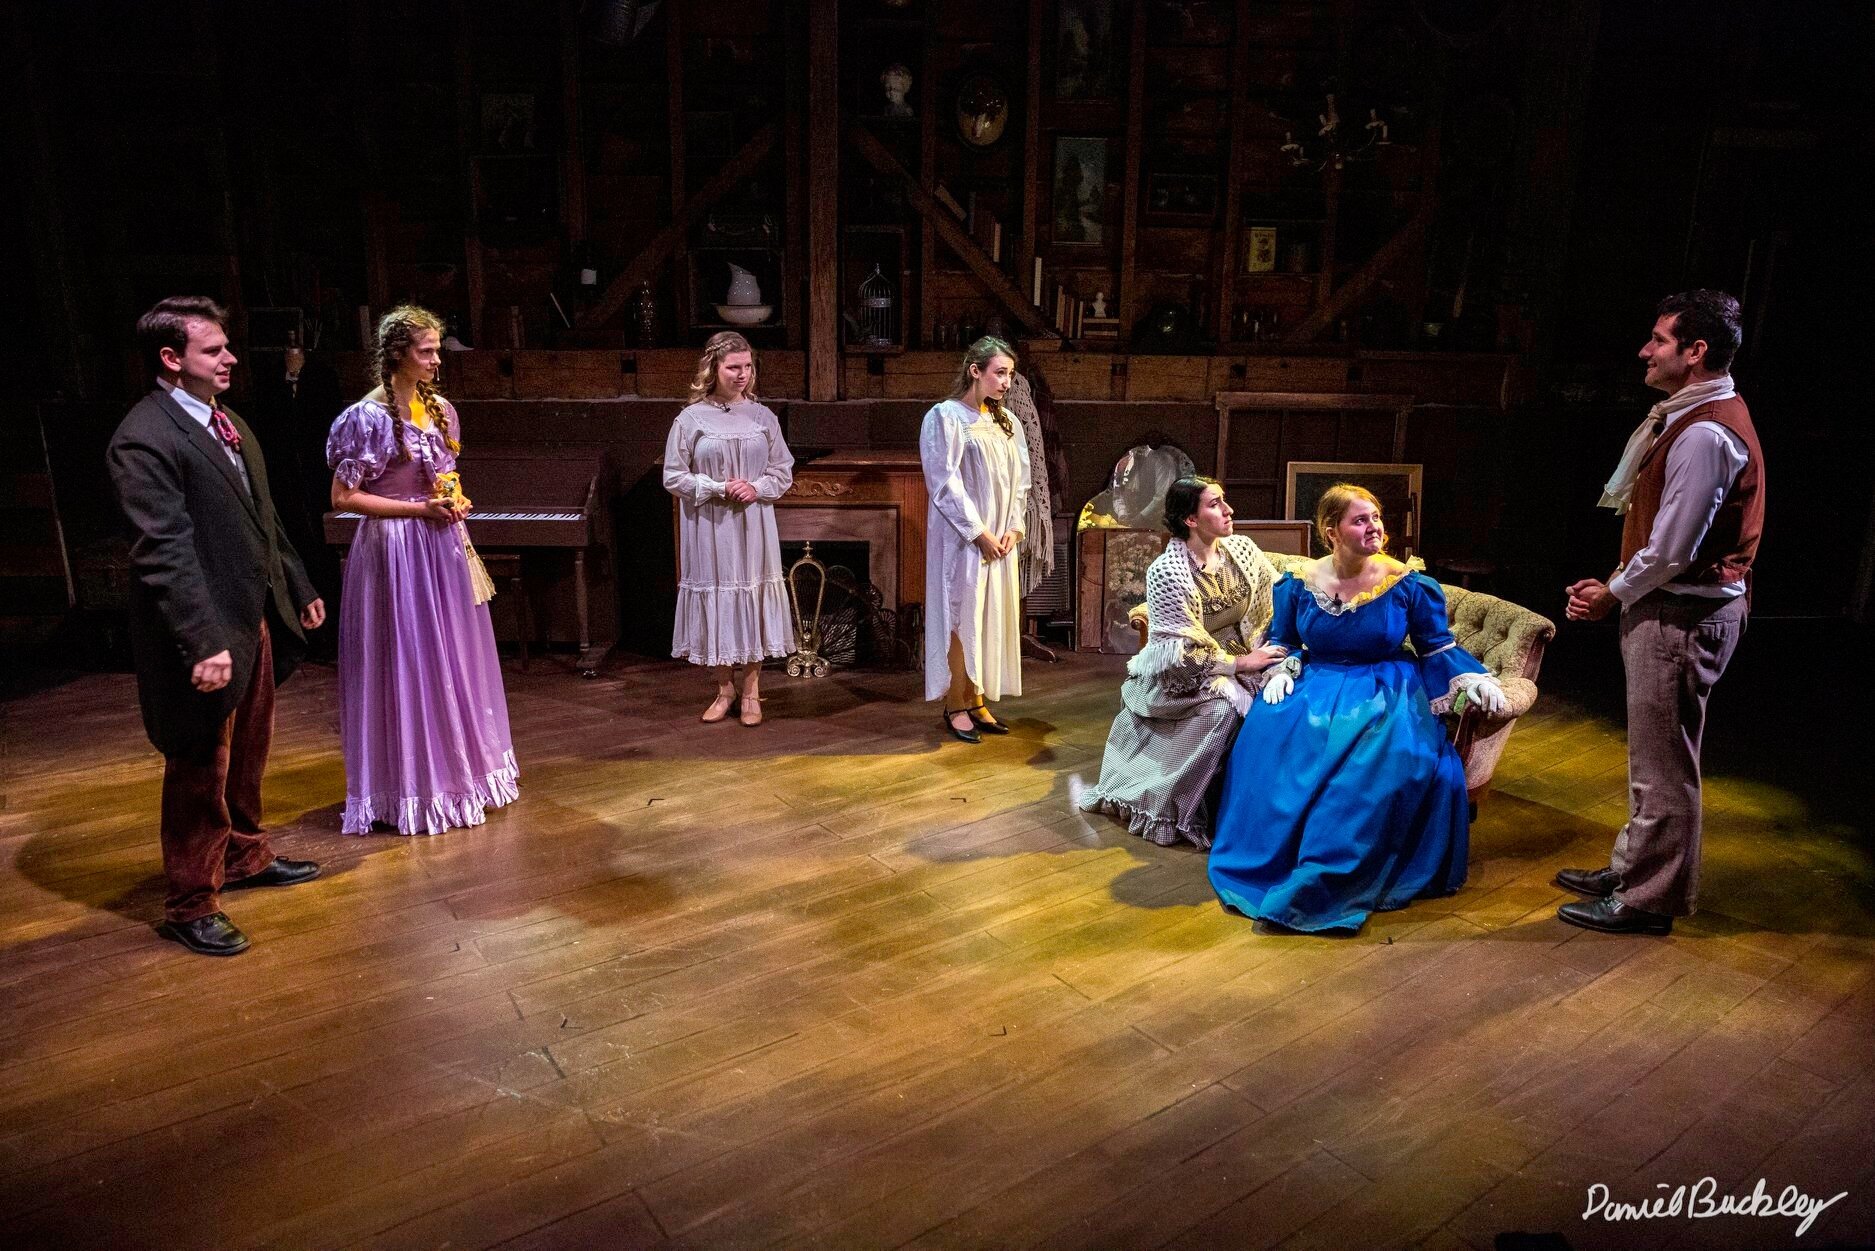    Little Women The Musical  by Knee, Howland, and Dickstein Holmdel Theatre Company   Musical direction by Randy Hurst Scenic design by Joyce Horan Lighting and sound design by Chris Szczerbienski  Costume design by Kathy Connolly and Jessica Freela